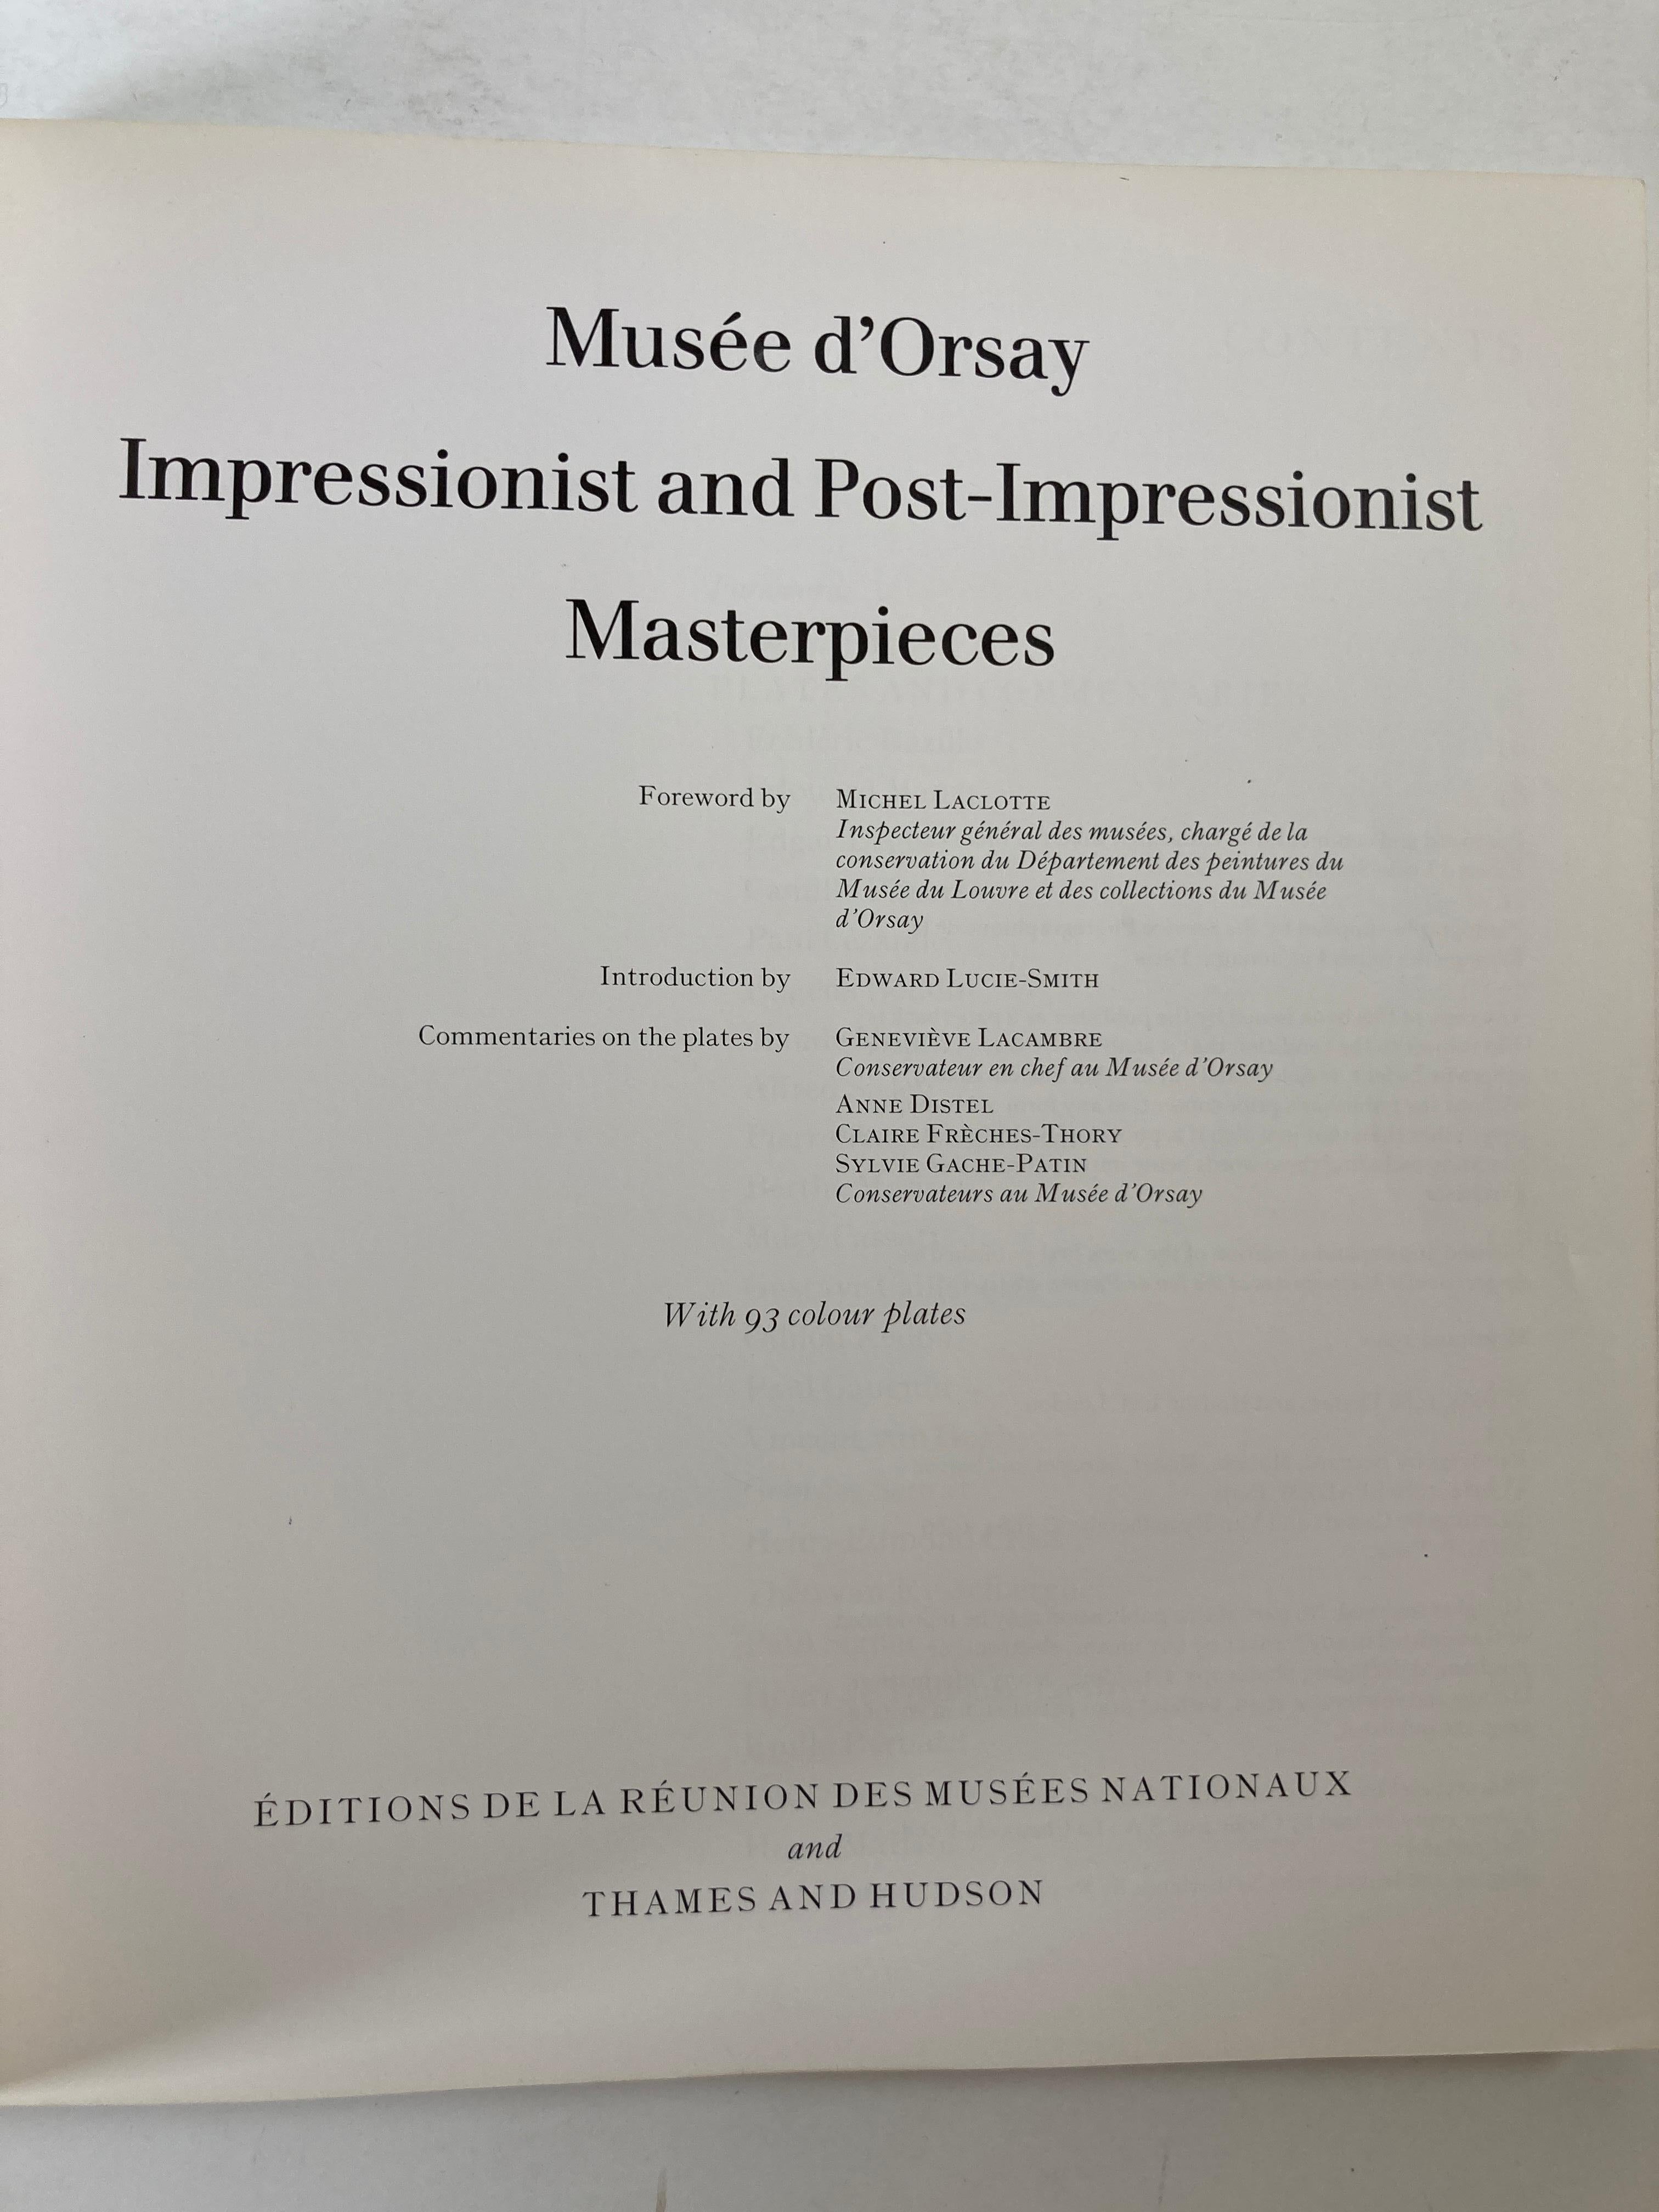 Indian Impressionist and Post-Impressionist Masterpieces at the Musee d'Orsay Book For Sale